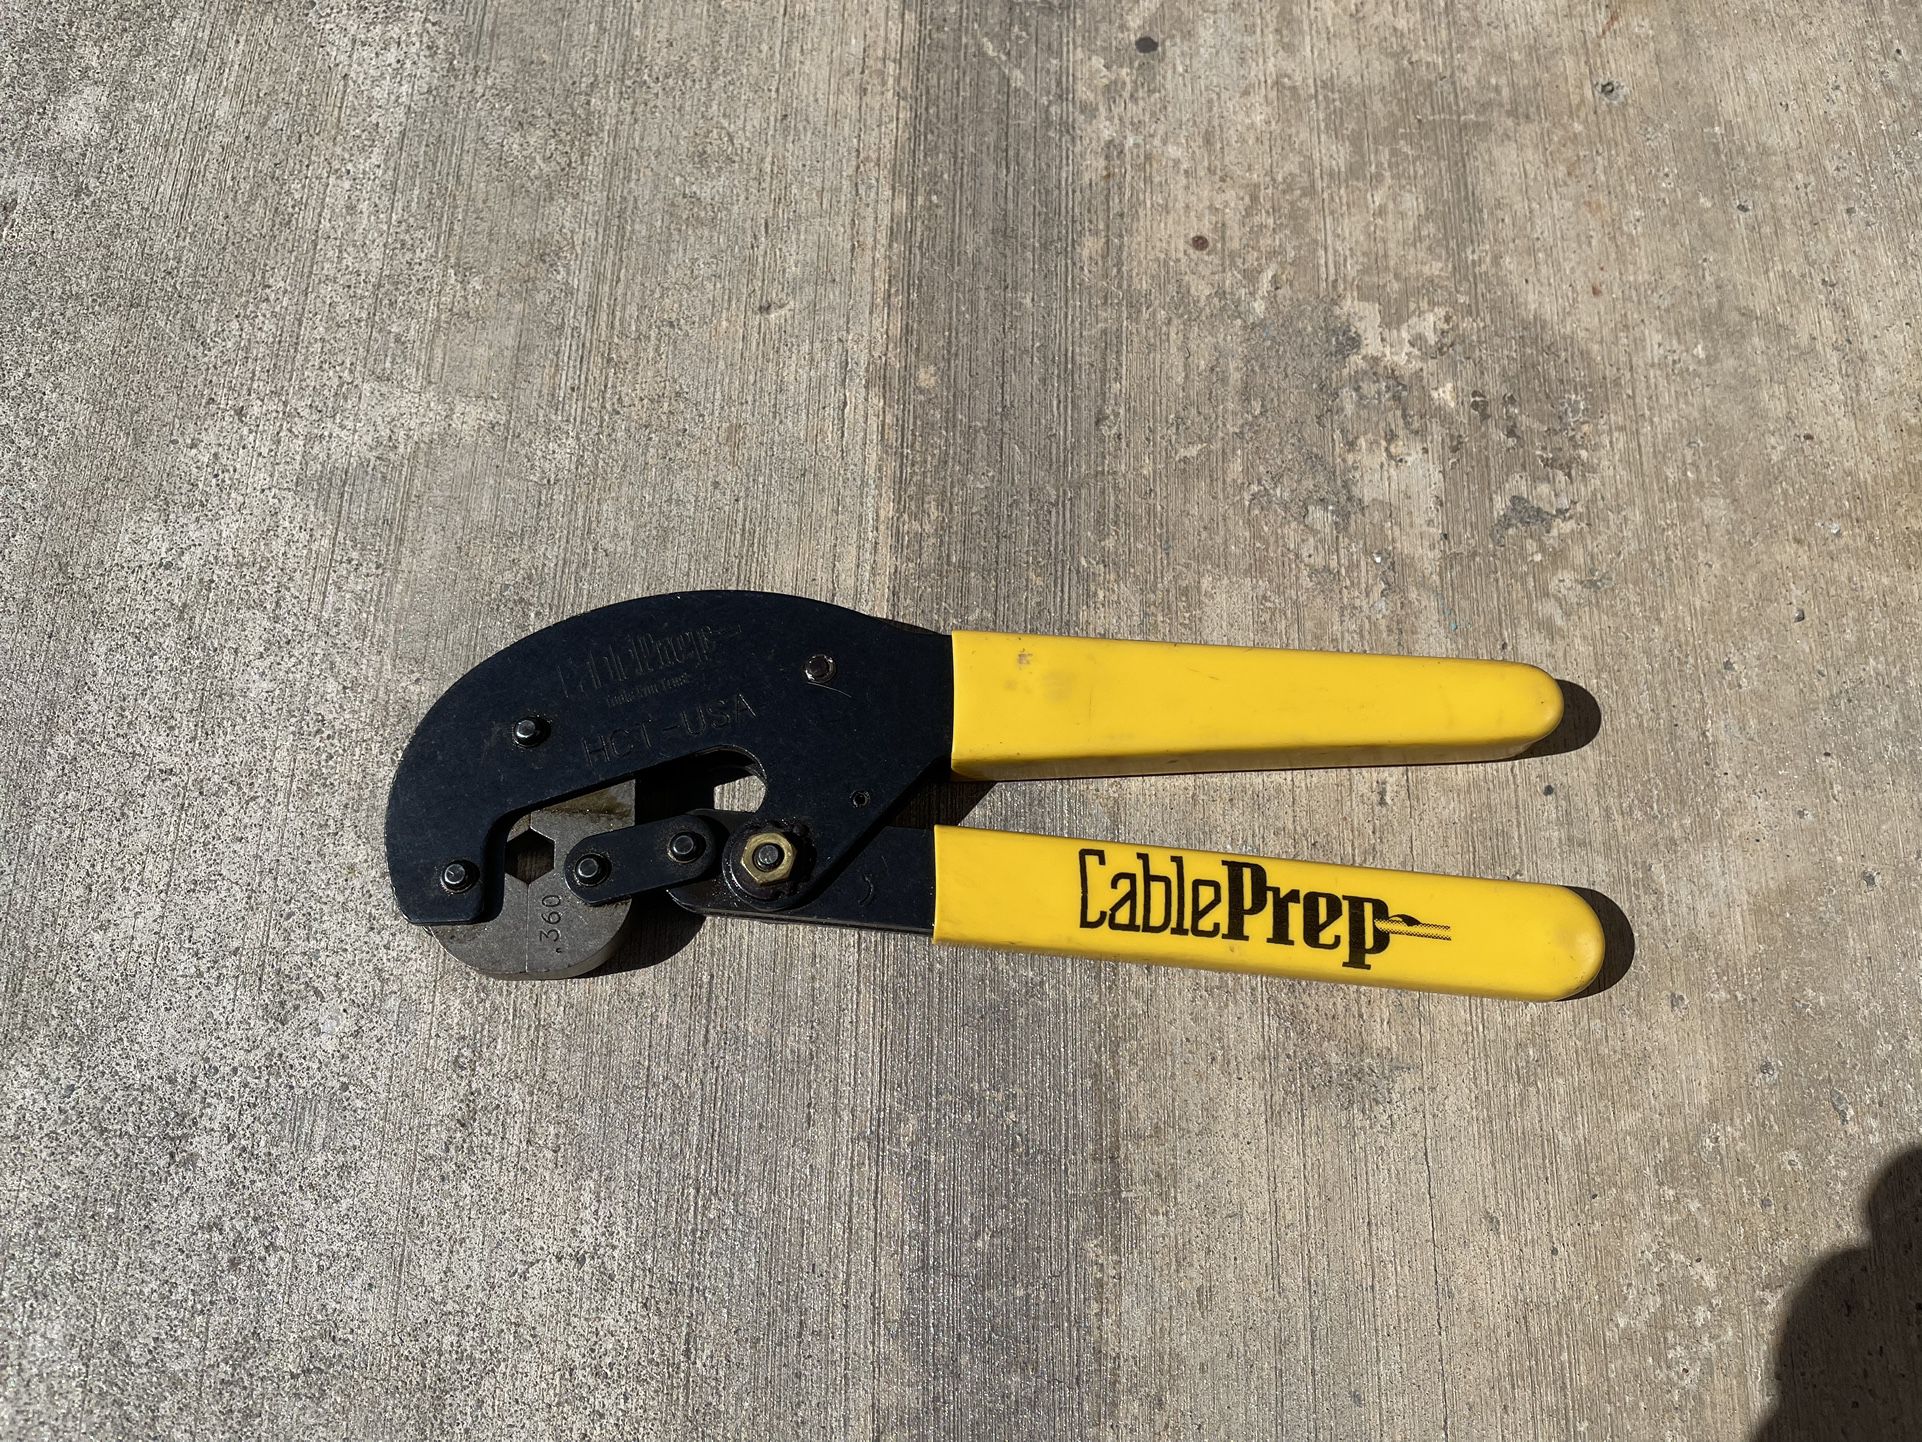 Coaxial CablePrep Brand Pliers